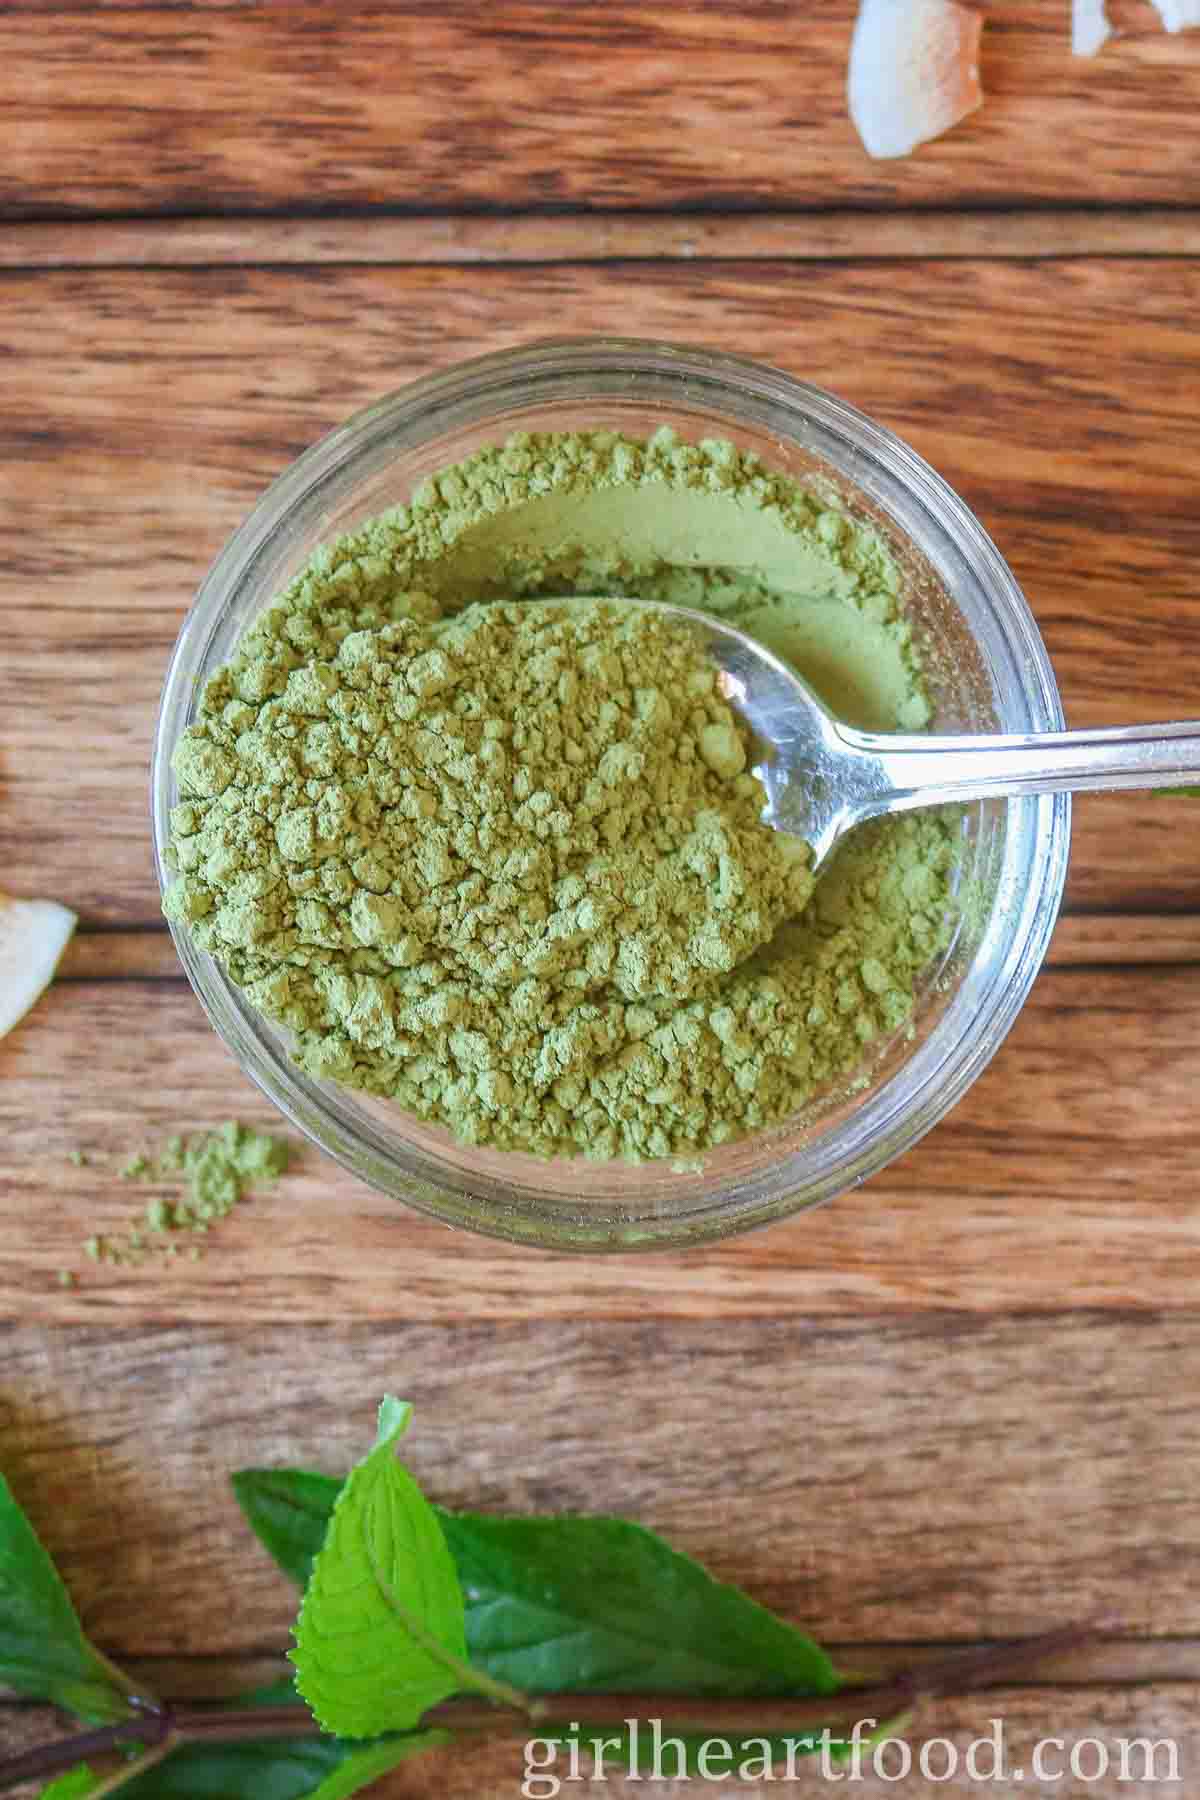 Small glass dish of matcha green tea powder with a spoon in the powder.